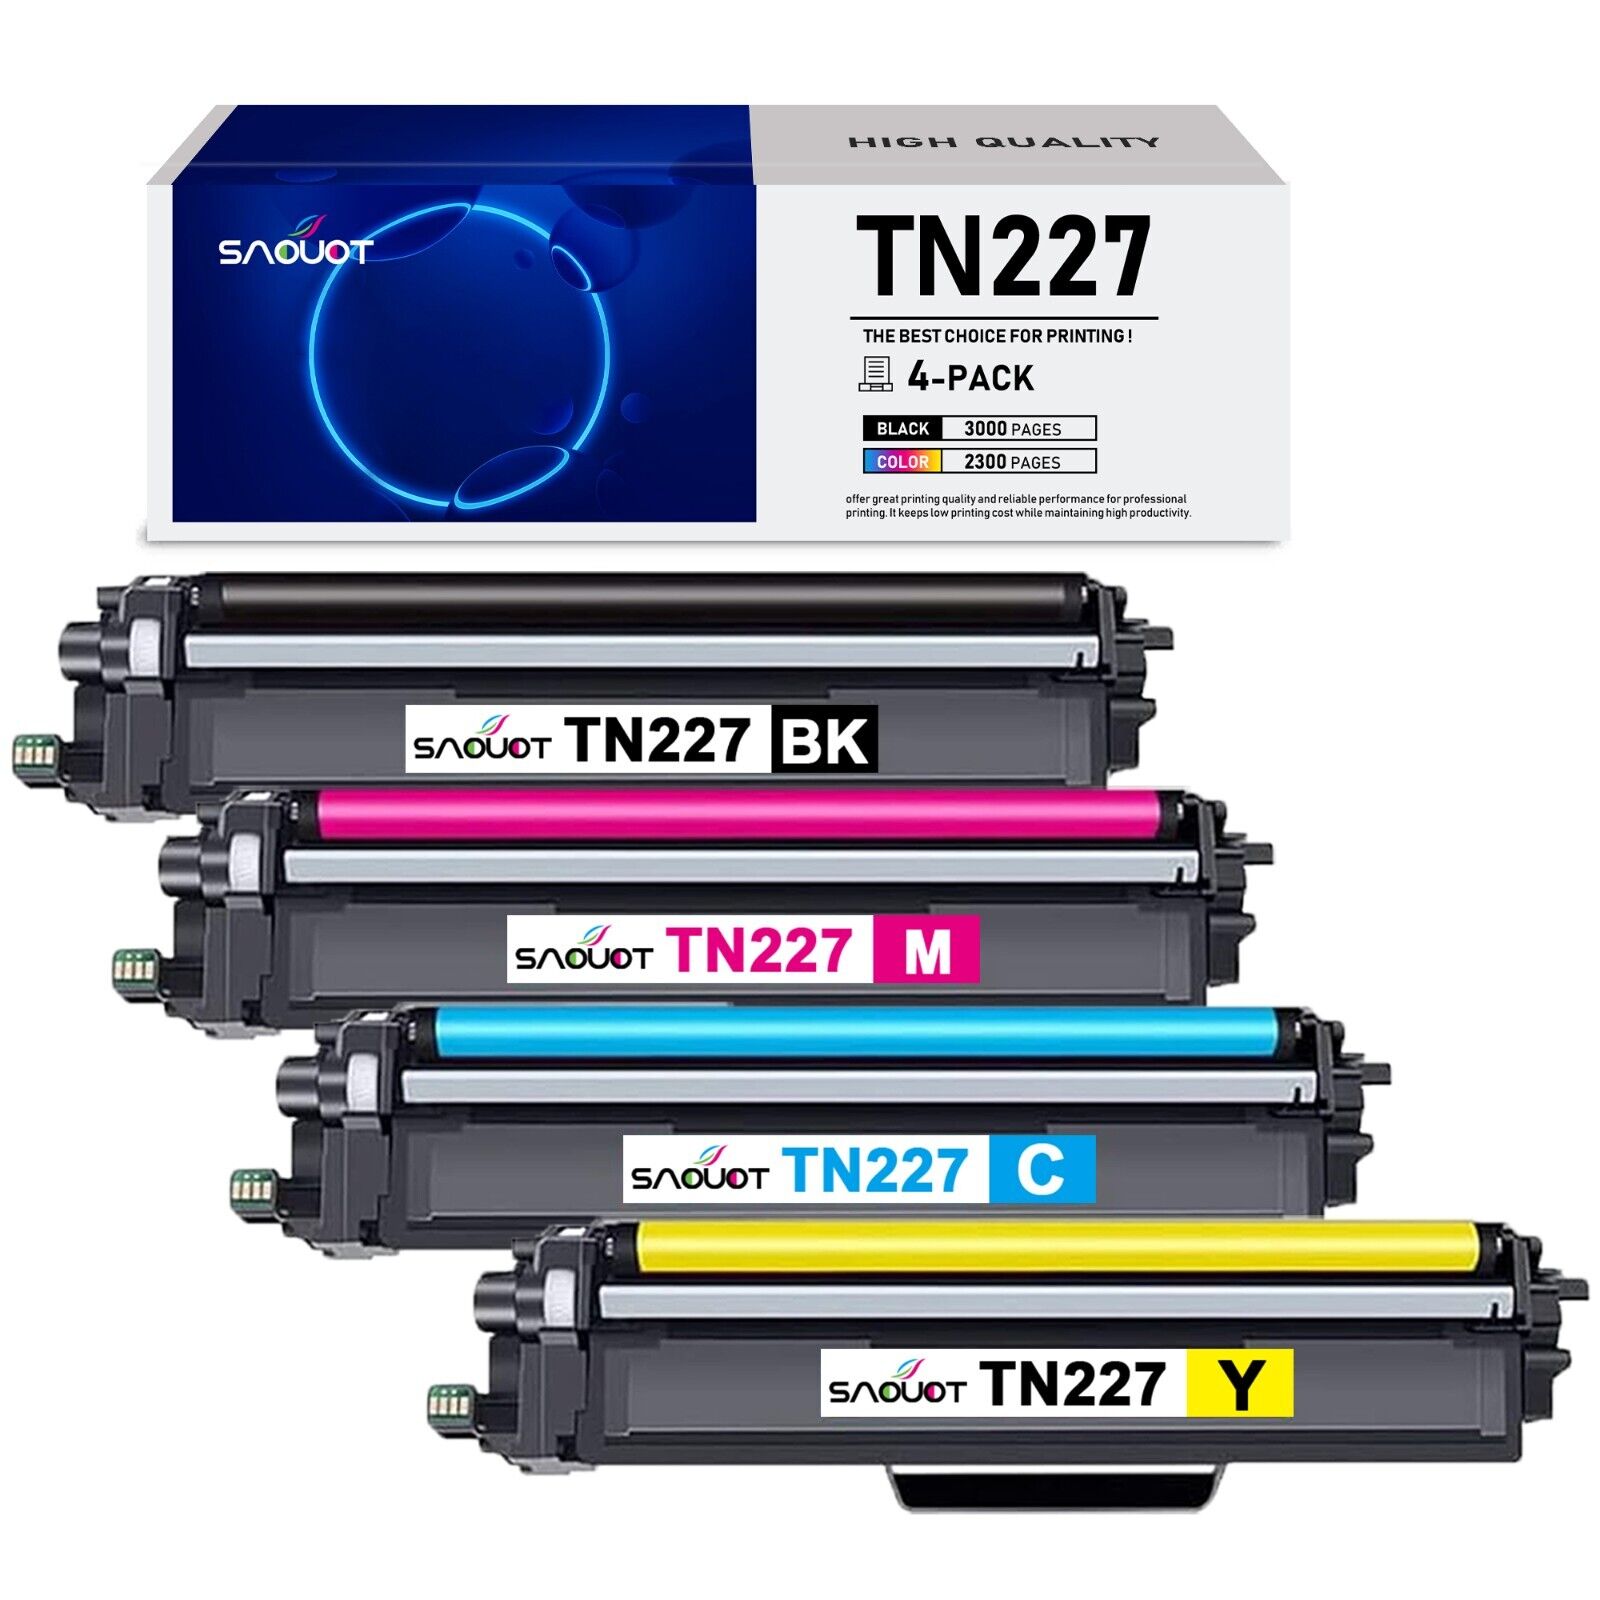 TN227 Toner Cartridge Replacement for Brother MFC-L3710CW HL-L3230CDW L3210CW